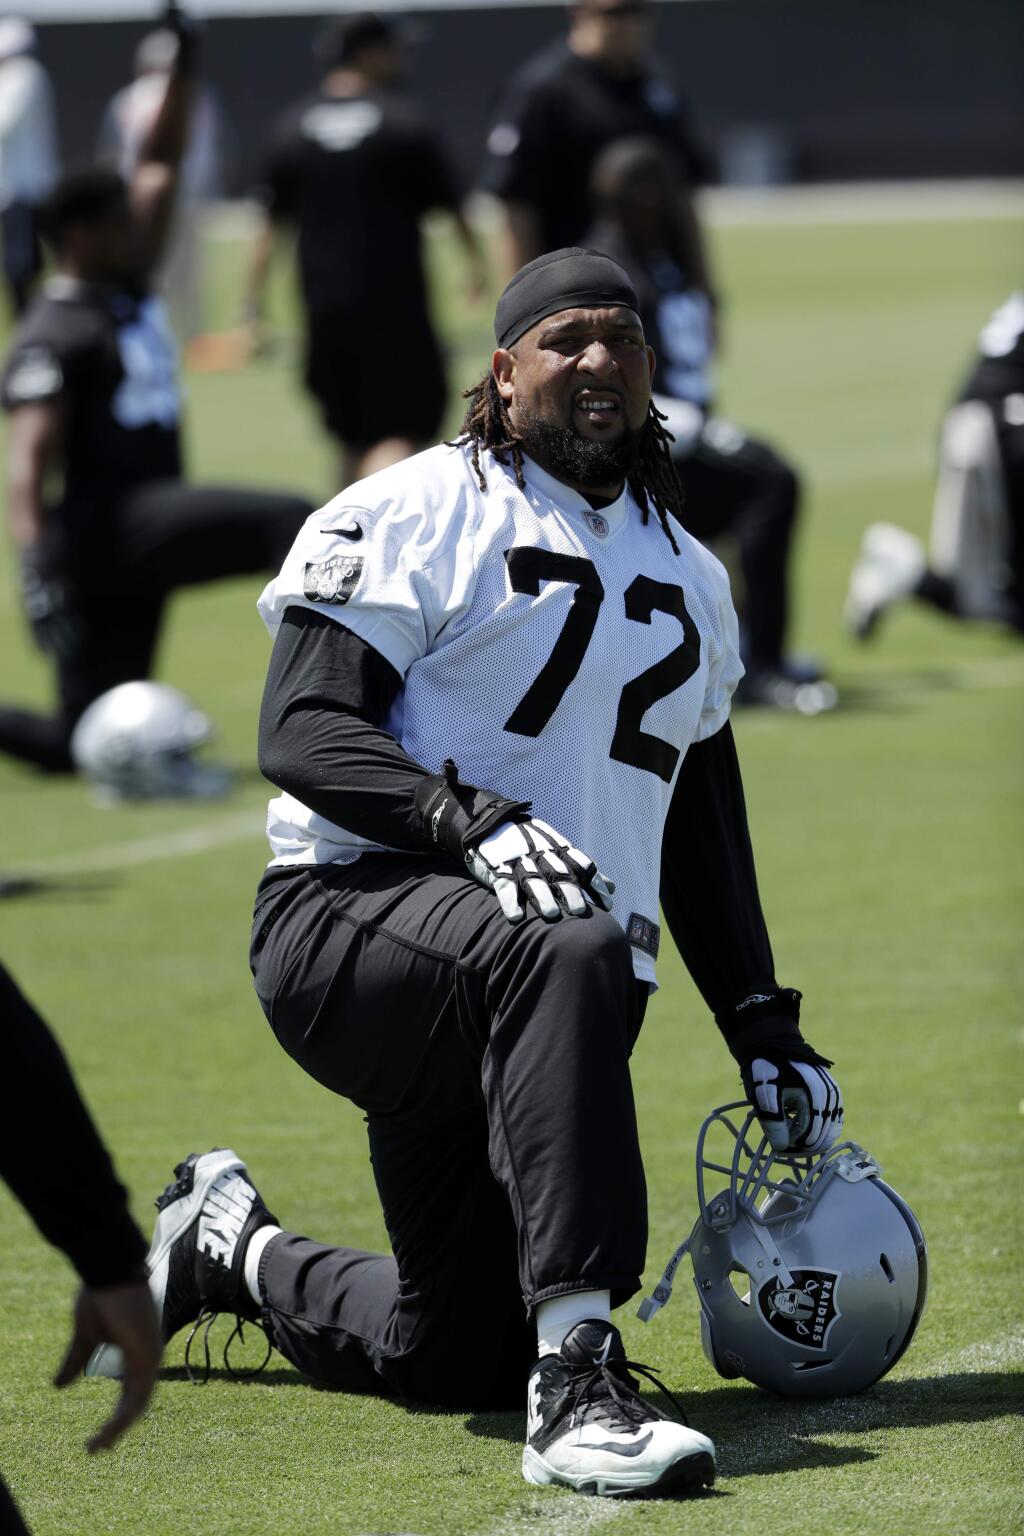 Oakland Raiders tackle Donald Penn (72) during the team's organized team activity at its NFL football training facility Tuesday, June 6, 2017, in Alameda, Calif. (AP Photo/Marcio Jose Sanchez)